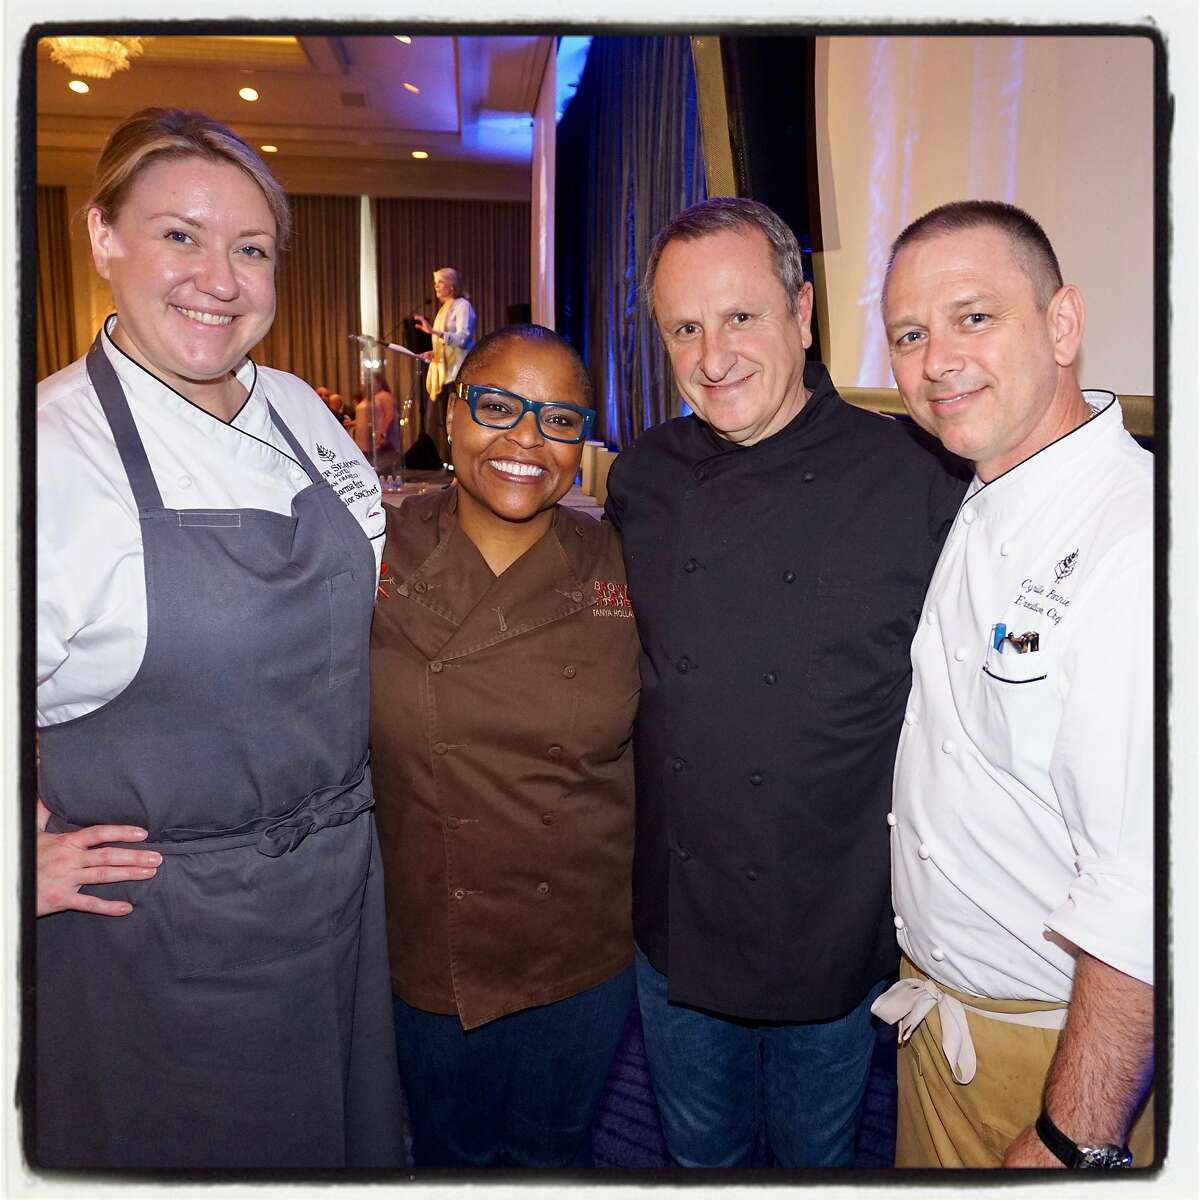 Four Seasons Hotel sous chef Norma Whitt (left) with Brown Sugar Kitchen chef Tanya Holland, Piperade chef Gerald Hirigoyen and Four Seasons executive chef Cyrille Pannier at the Mission Dolores Academy lunch. April 25, 2018.